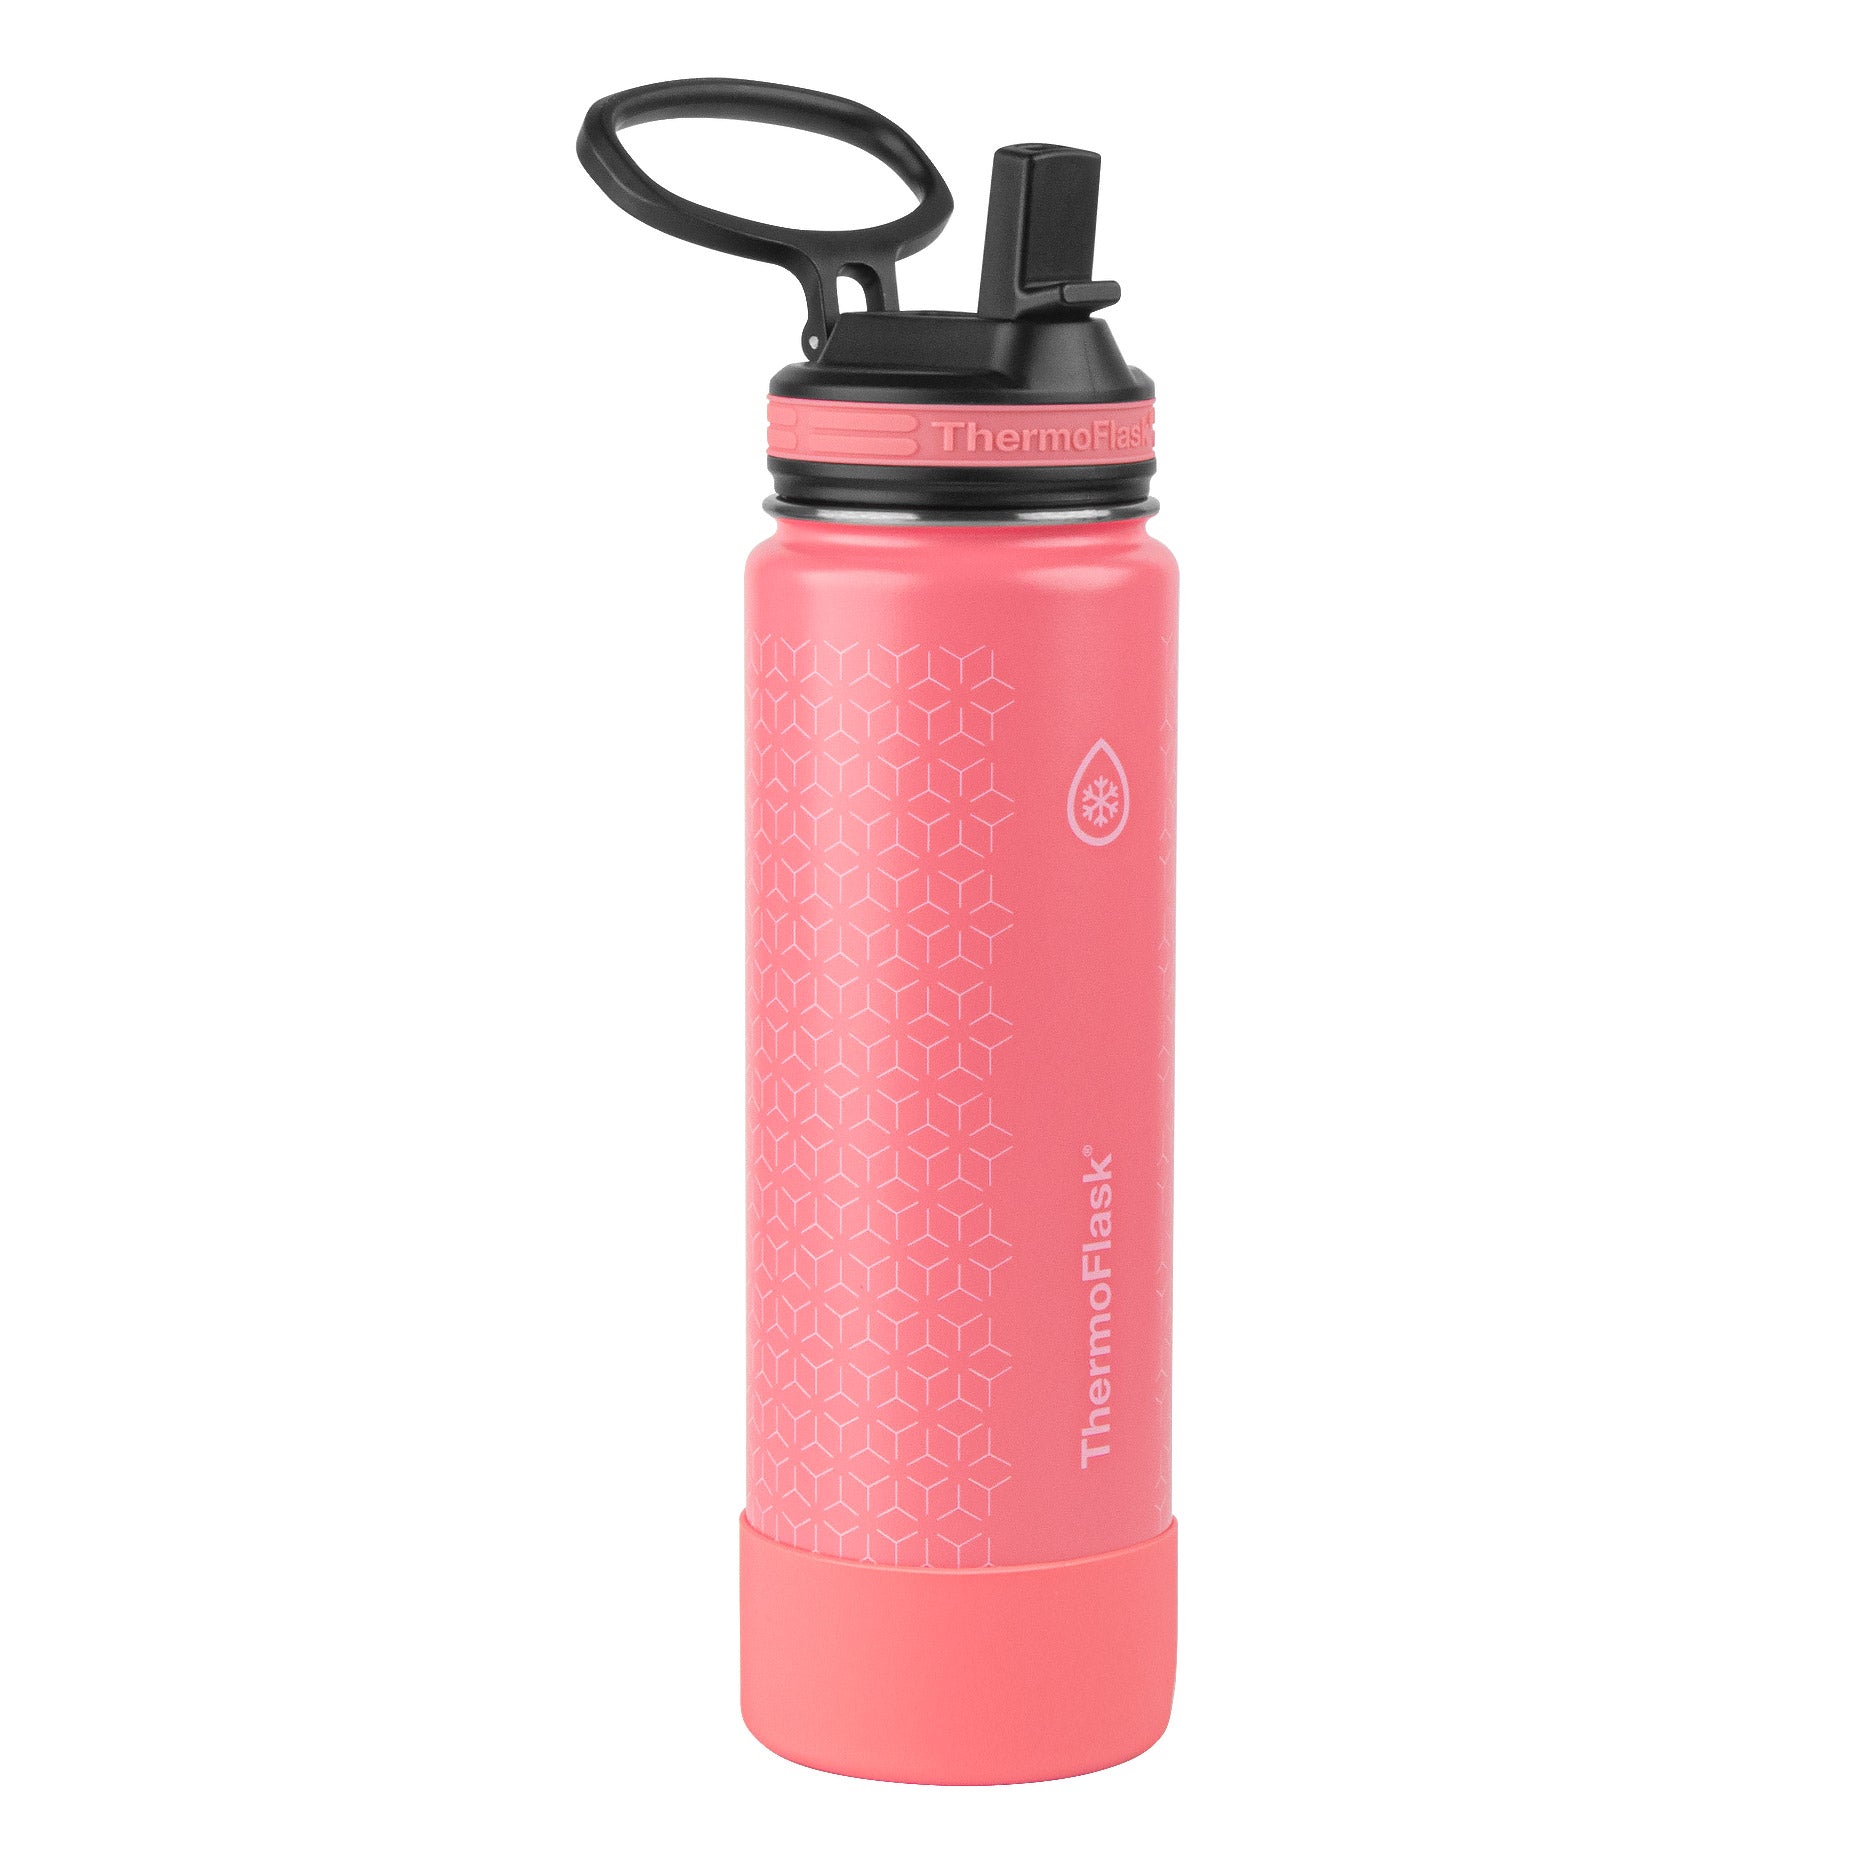 24 Oz Stainless Steel Insulated Water Bottle, 2-Pack